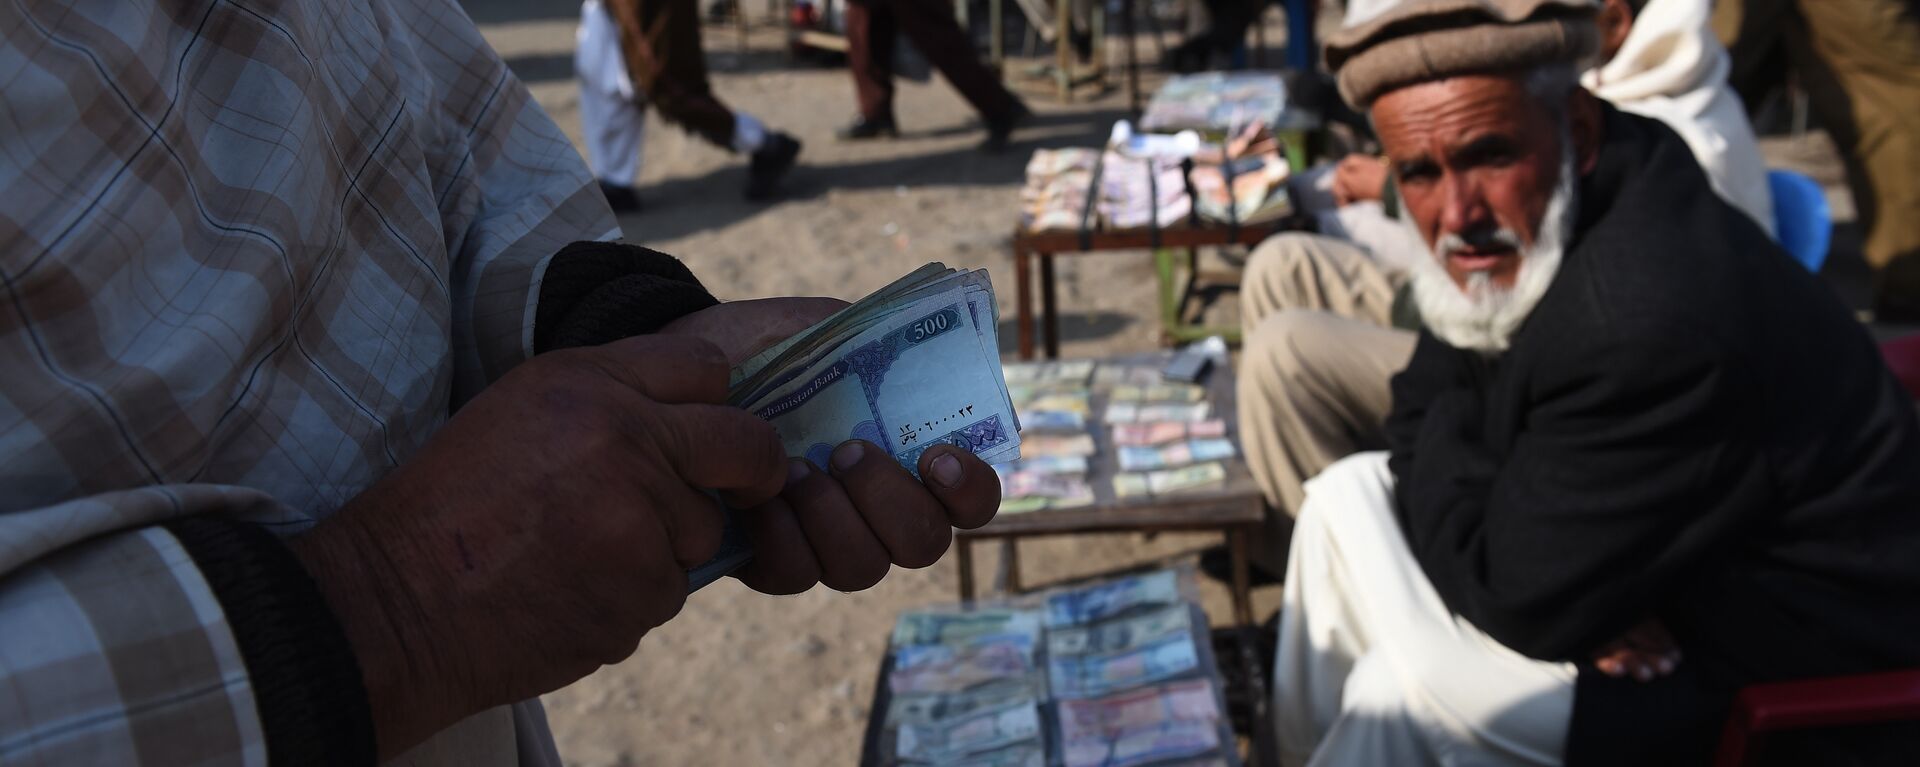 In this photograph taken on December 29, 2014, an Afghan customer (L) counts his Afghani currency notes at a currency exchange market along the roadside in Kabul - اسپوتنیک افغانستان  , 1920, 16.12.2021